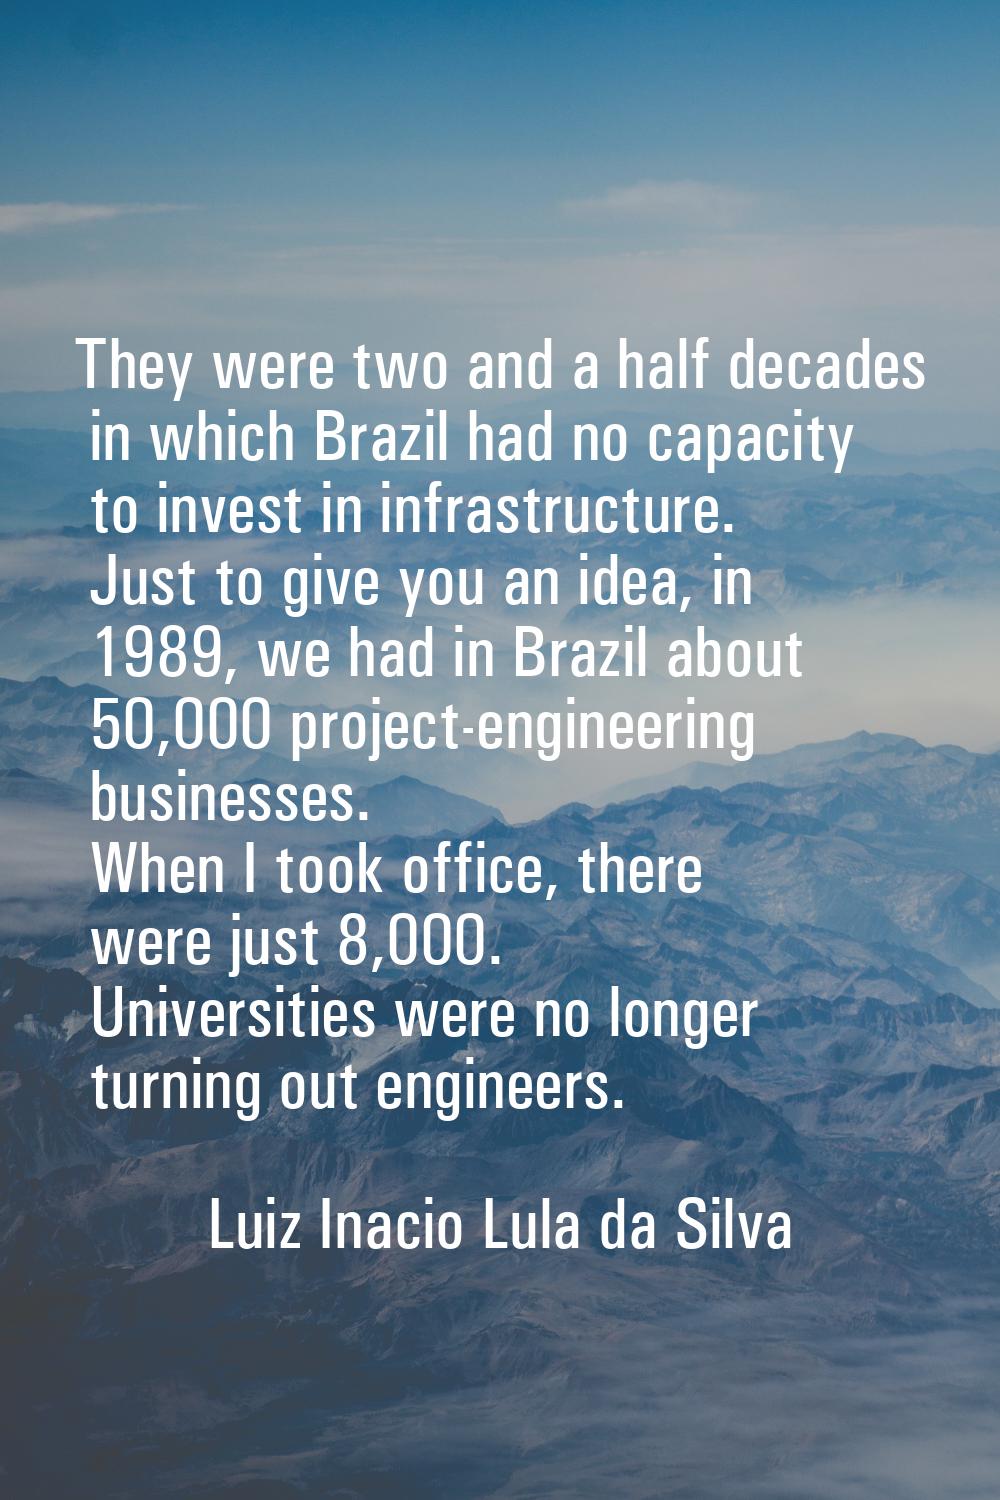 They were two and a half decades in which Brazil had no capacity to invest in infrastructure. Just 